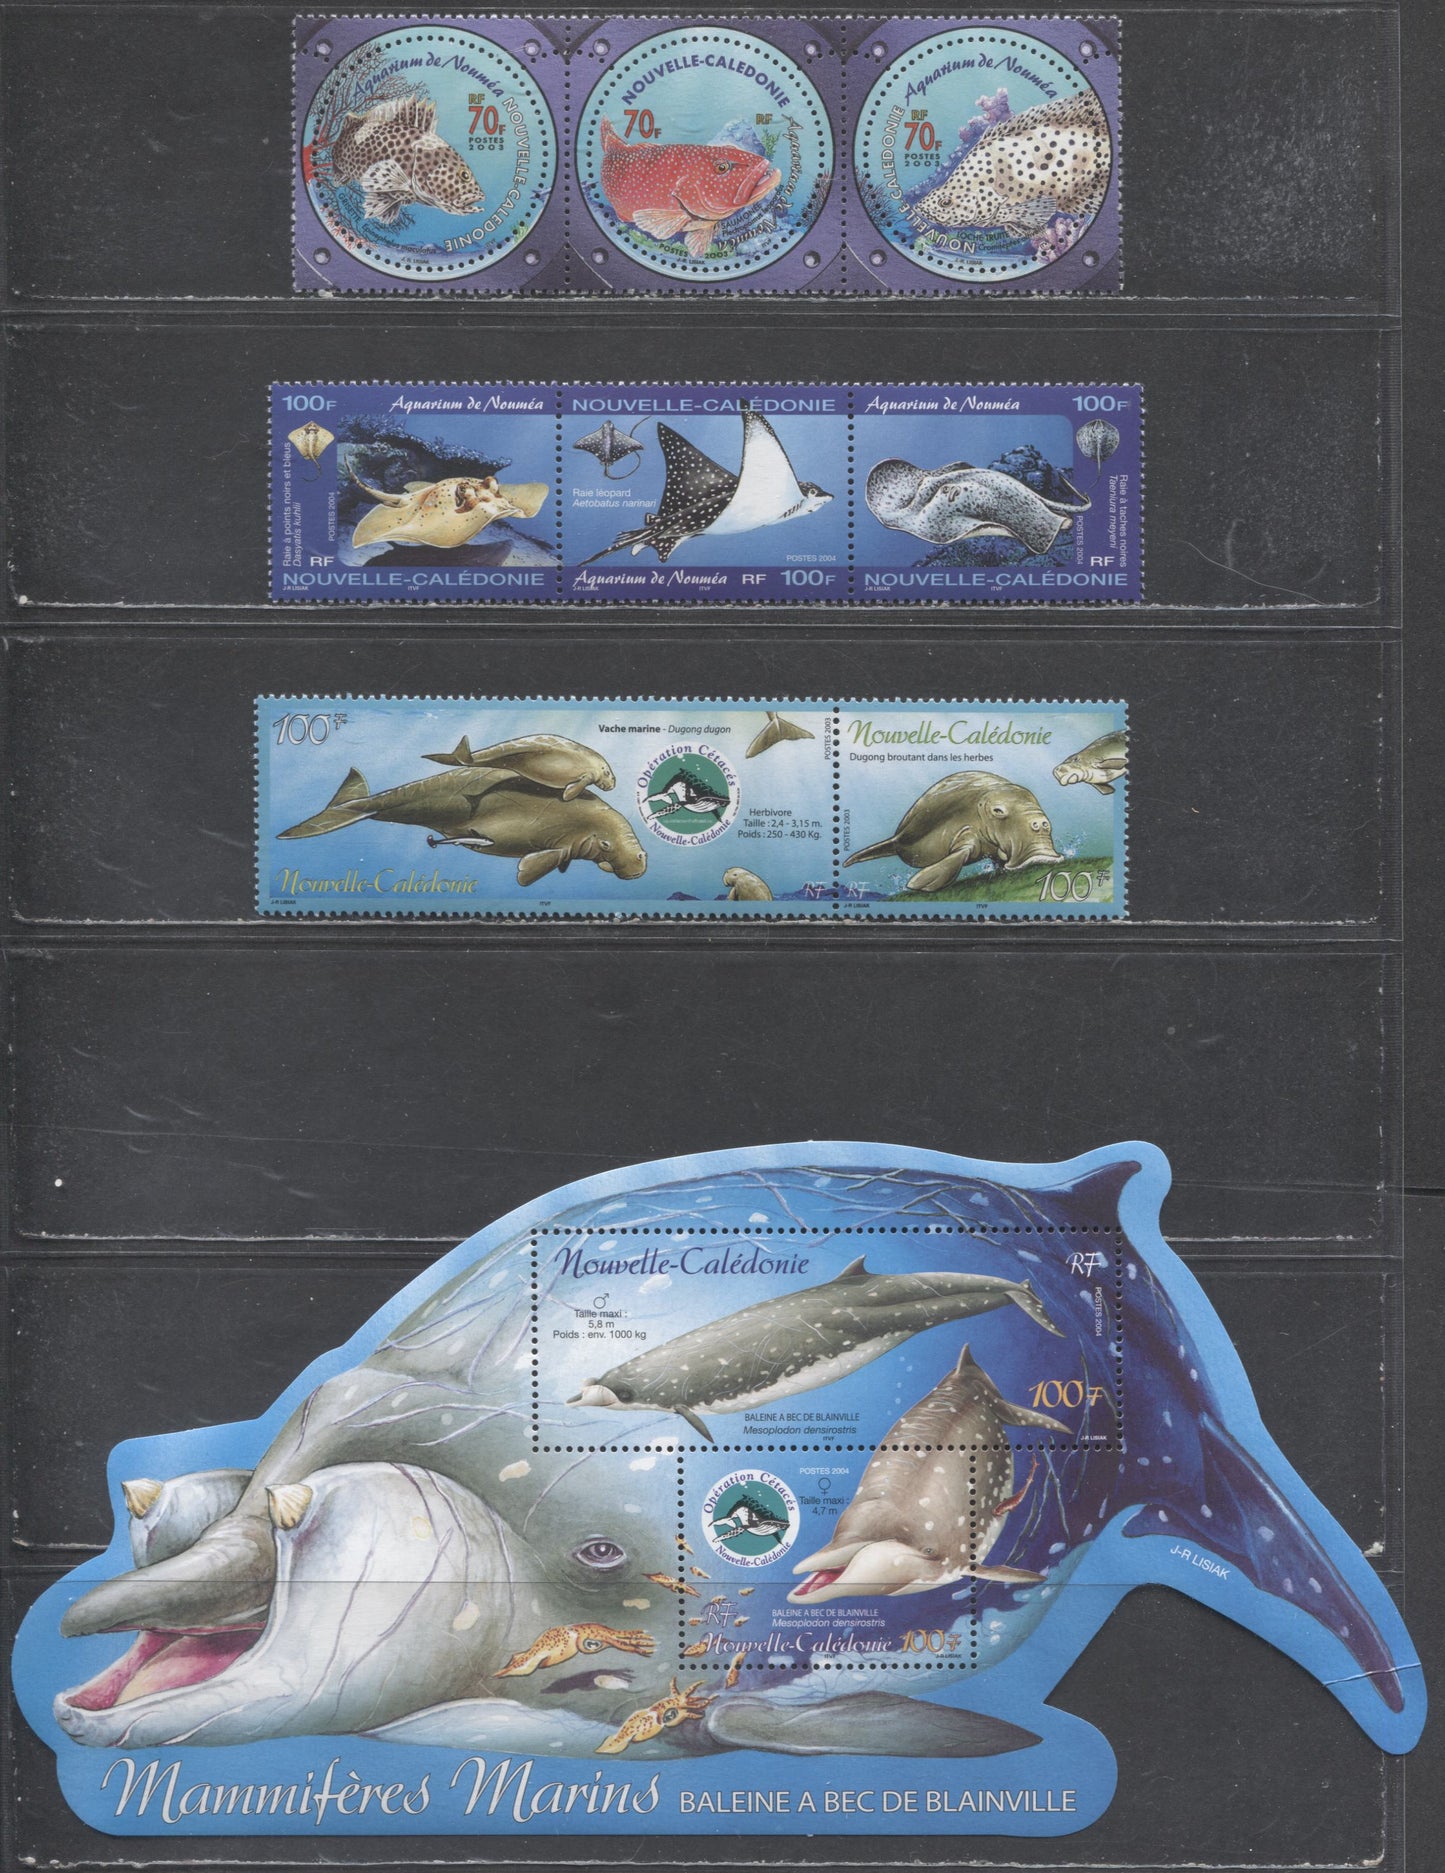 Lot 127 New Caledonia SC#920/943 2003-2004 Fish At Noumea Aquarium, Operation Cetacean, Rays & Whale Issues, 4 VFNH Single+Label, Strips Of 3 & Souvenir Sheets, Click on Listing to See ALL Pictures, 2017 Scott Cat. $22.25